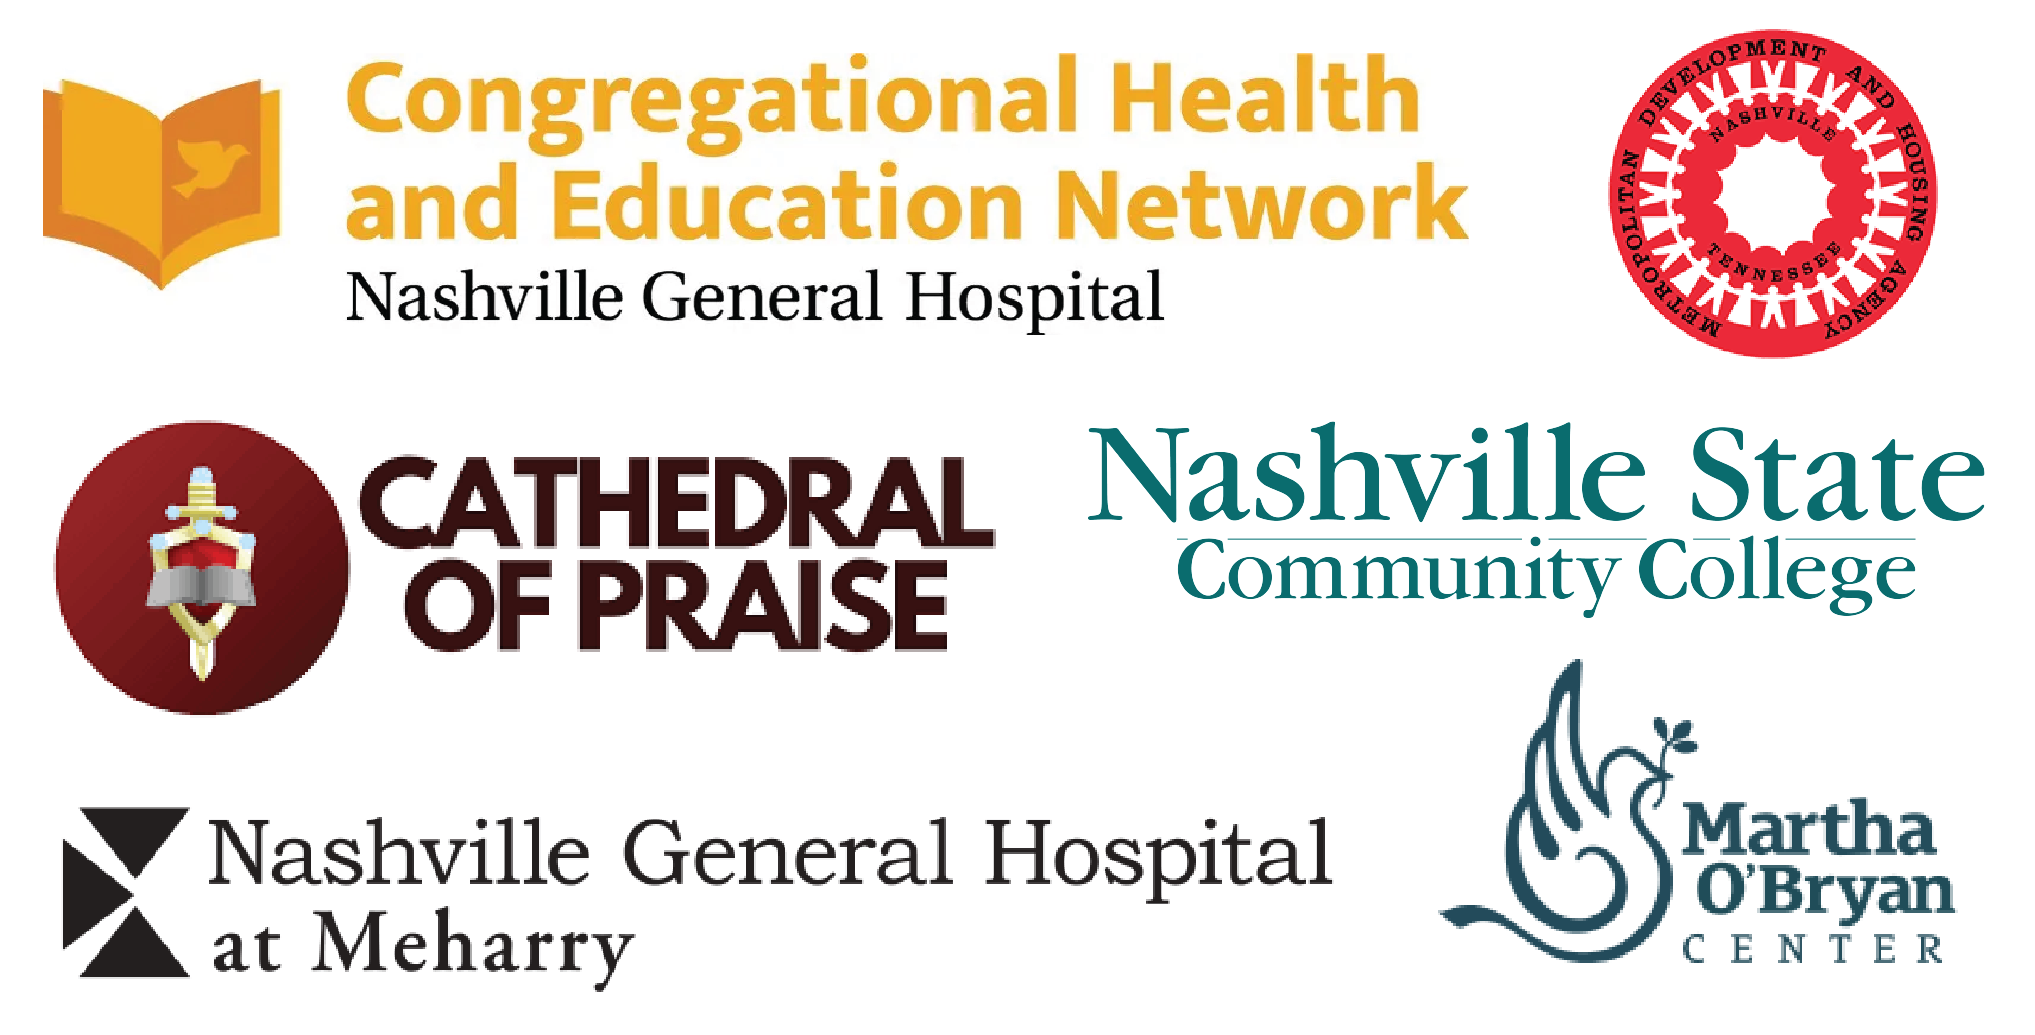 Urban League of Middle Tennessee, Cathedral of Praise, Nashville General Hospital, Congregational Health Education Network, Metropolitan Development and Housing Agency